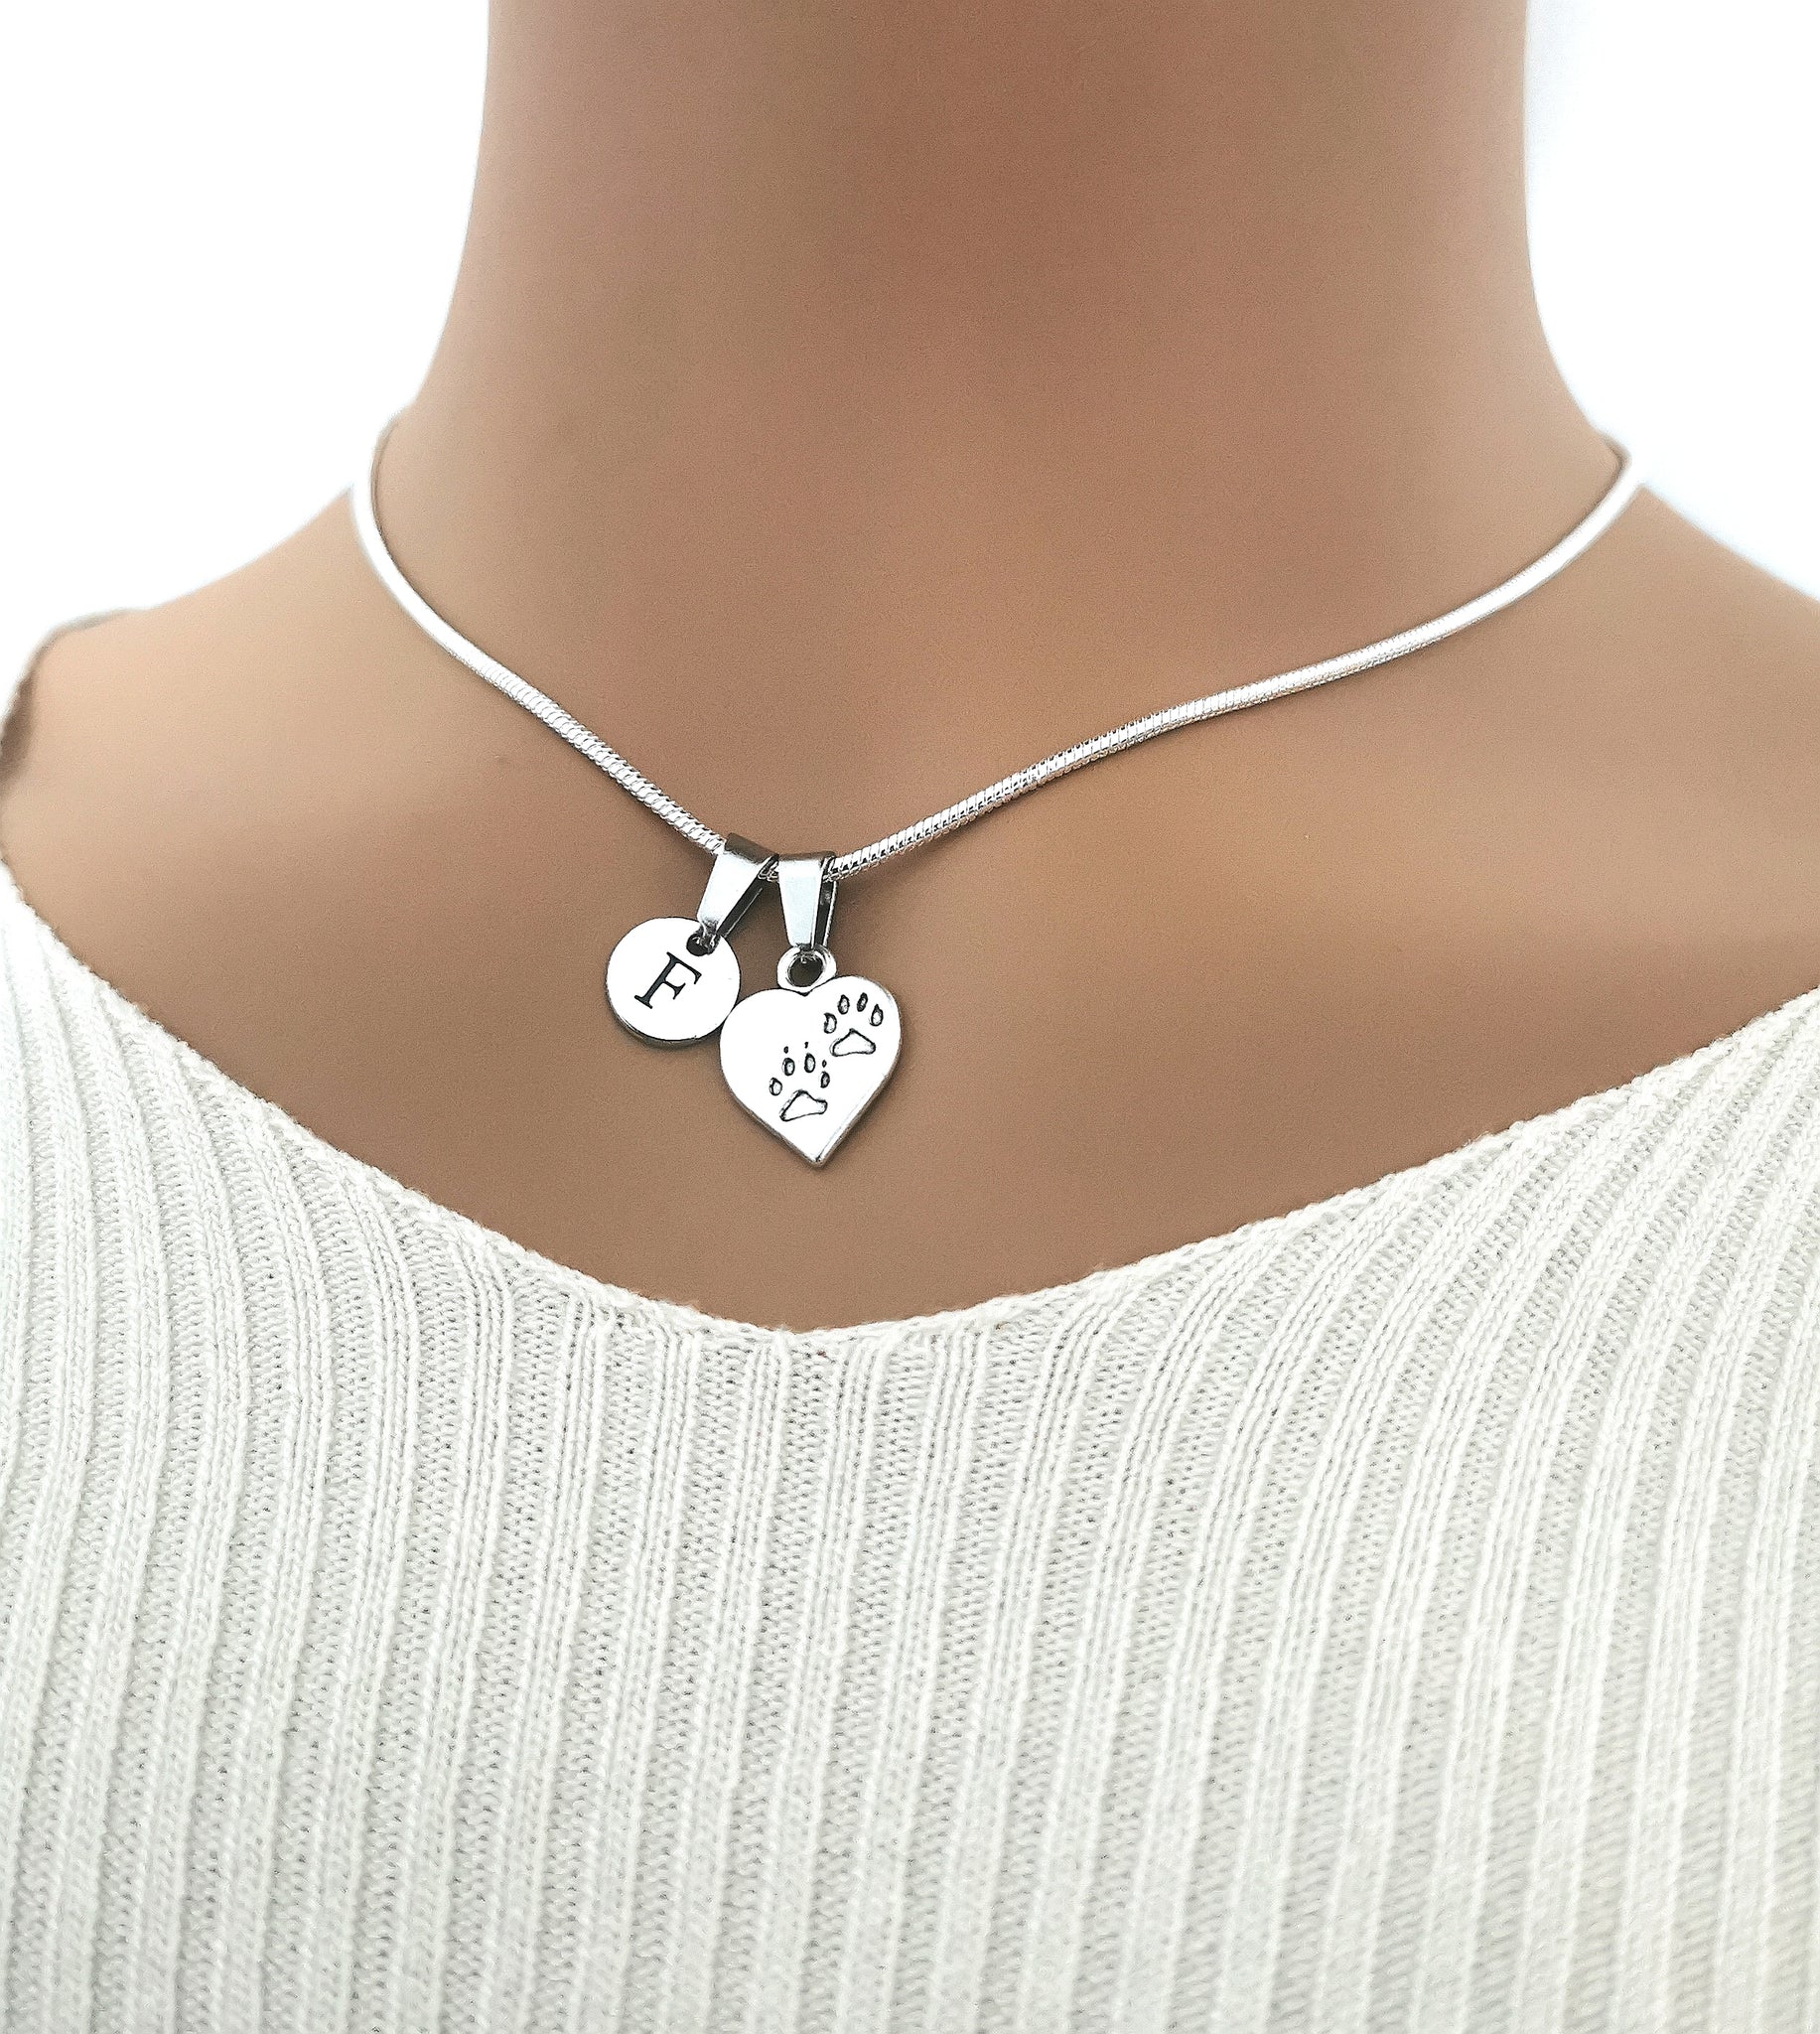 Heartwarming Silver Dog Paw Heart Necklace - Stylish Charm Gift with 18" length - Perfect for dog lovers - YouLoveYouShop